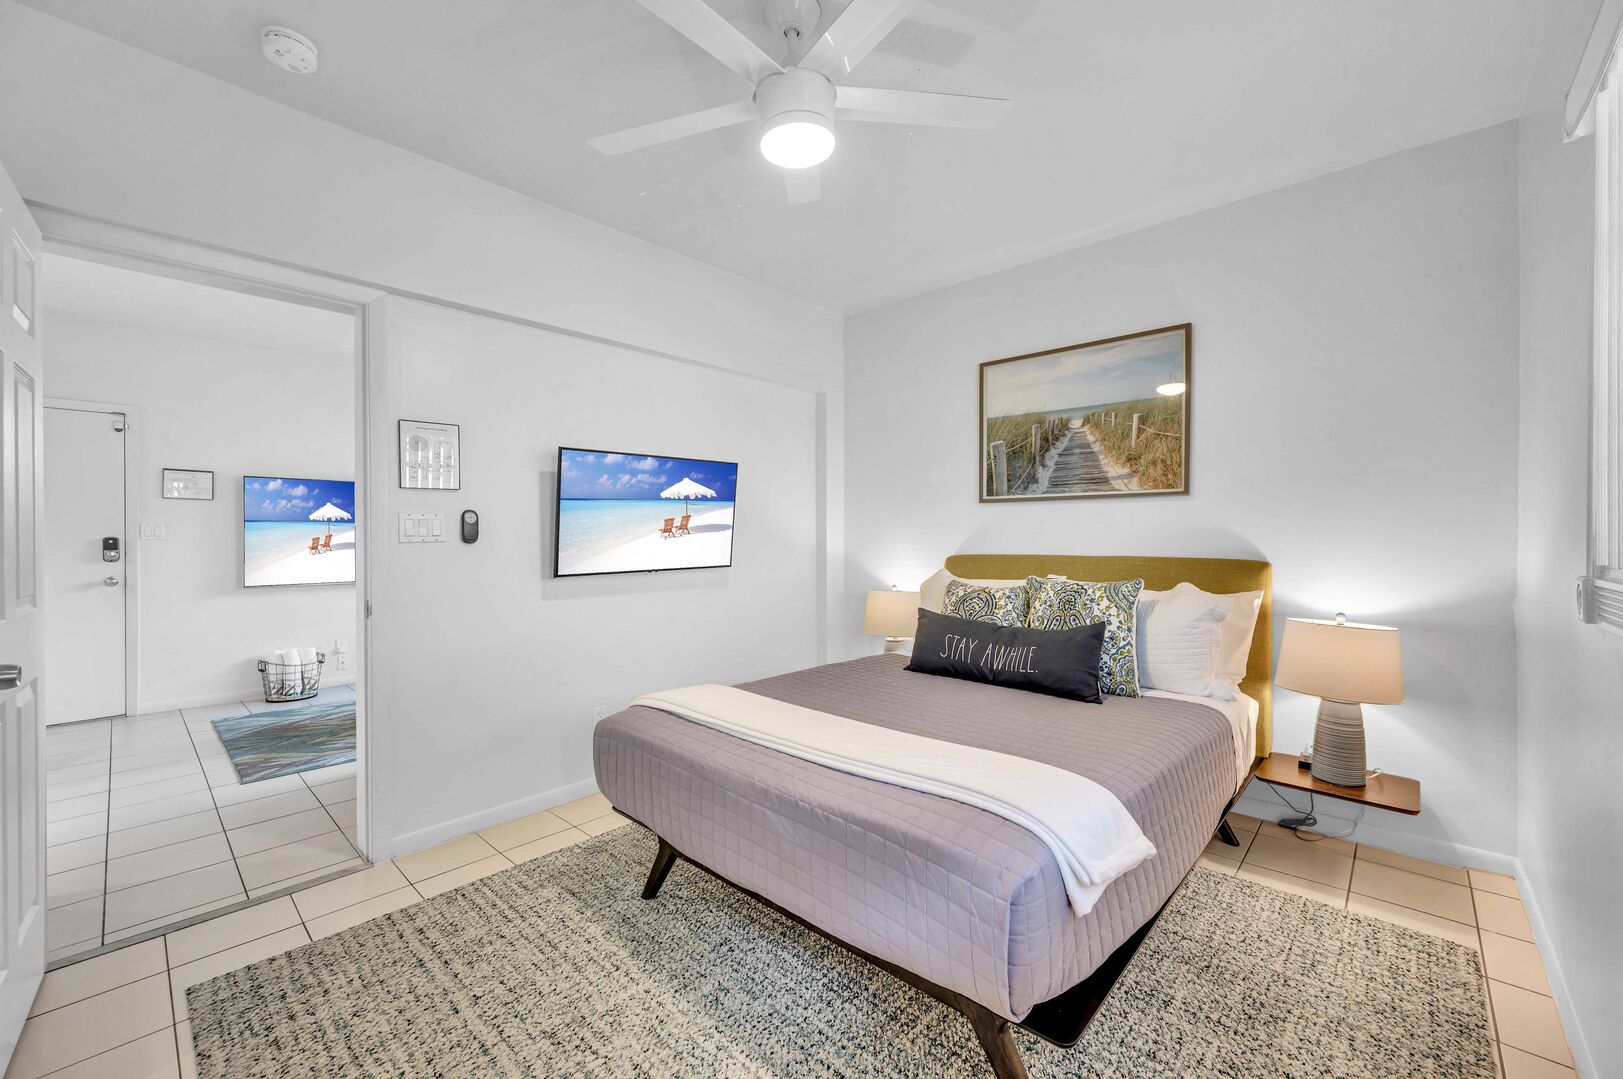 The bedroom features a Queen bed and 40-inch flat screen smart TV.